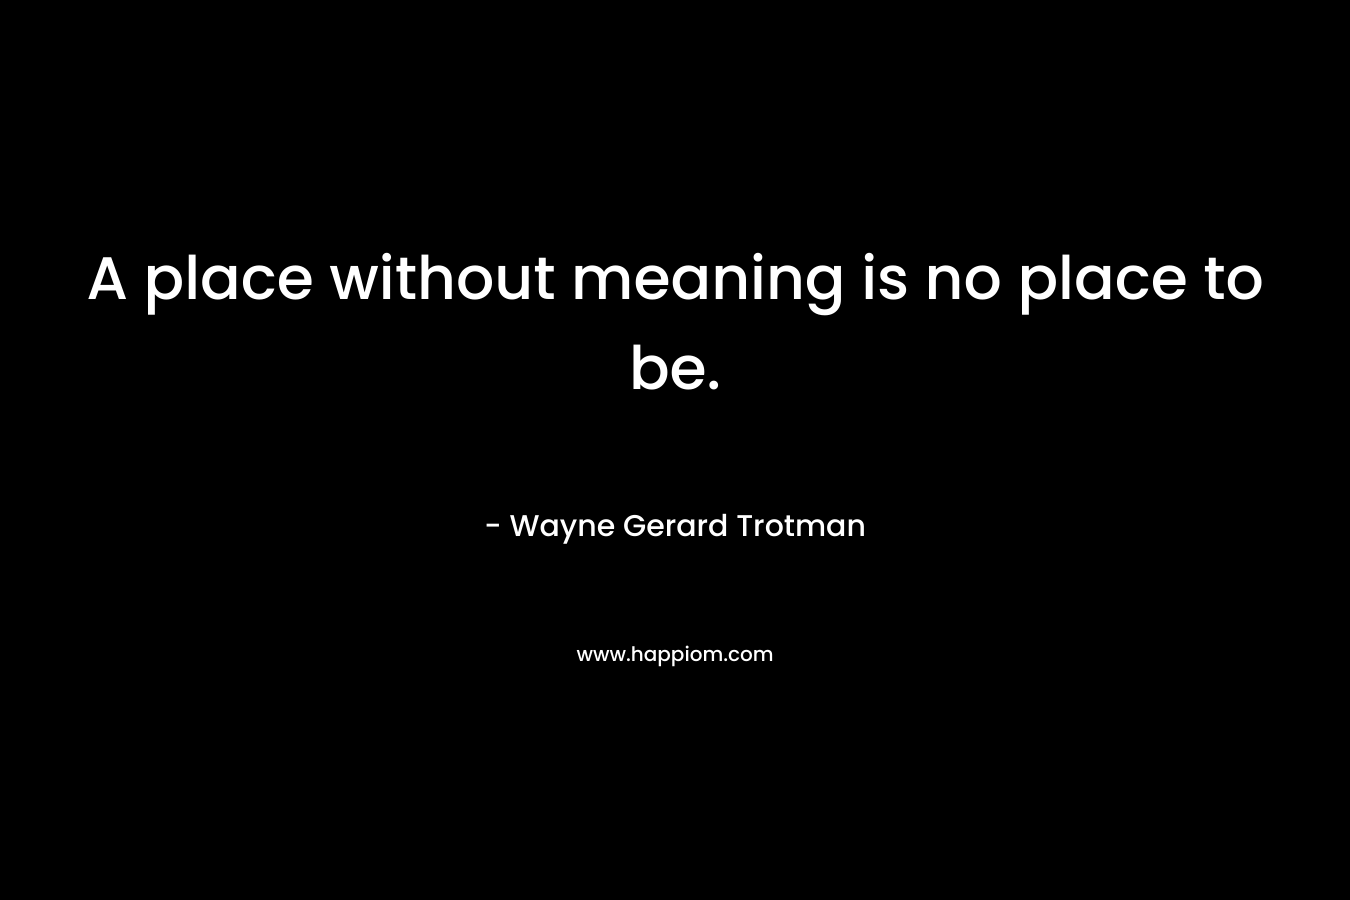 A place without meaning is no place to be.